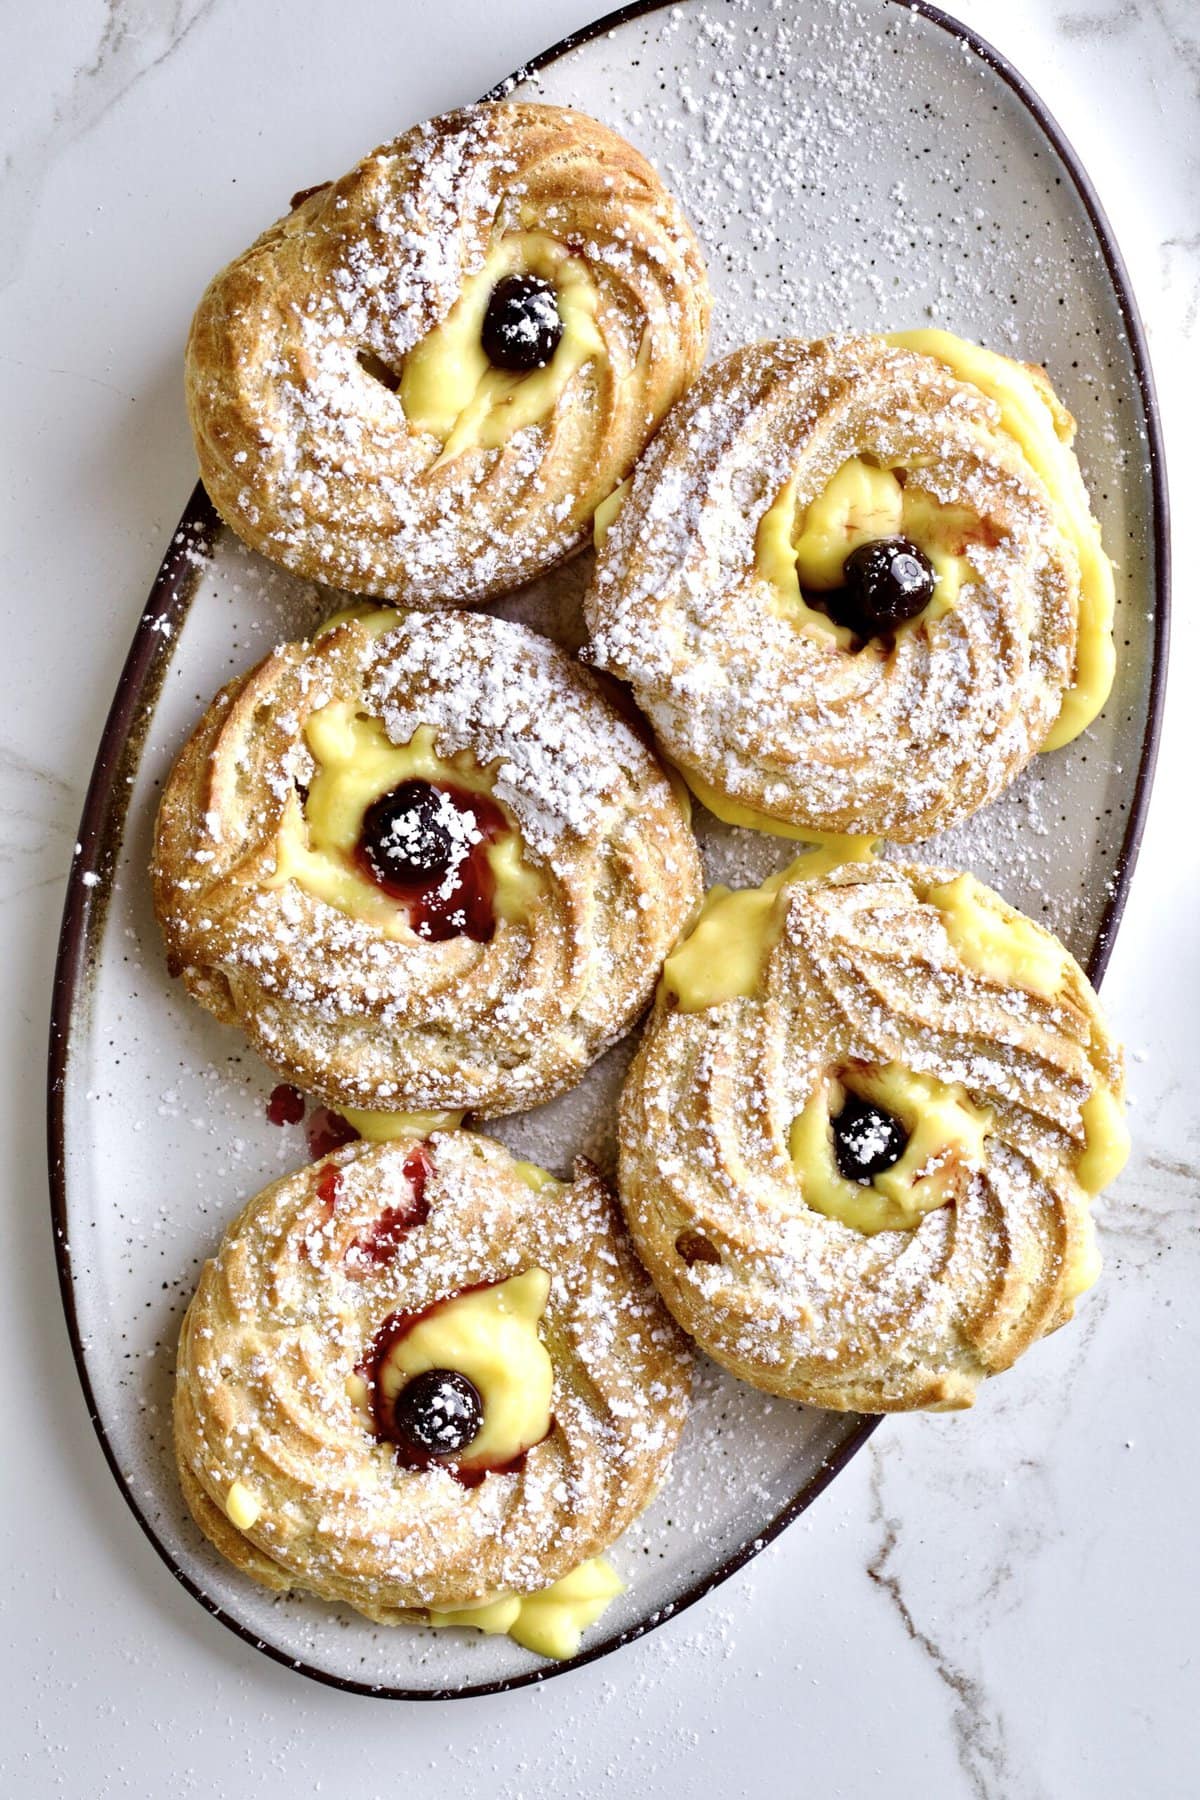 finish zeppole di san Giuseppe on a serving platter with cream and Amarena cherries on top.